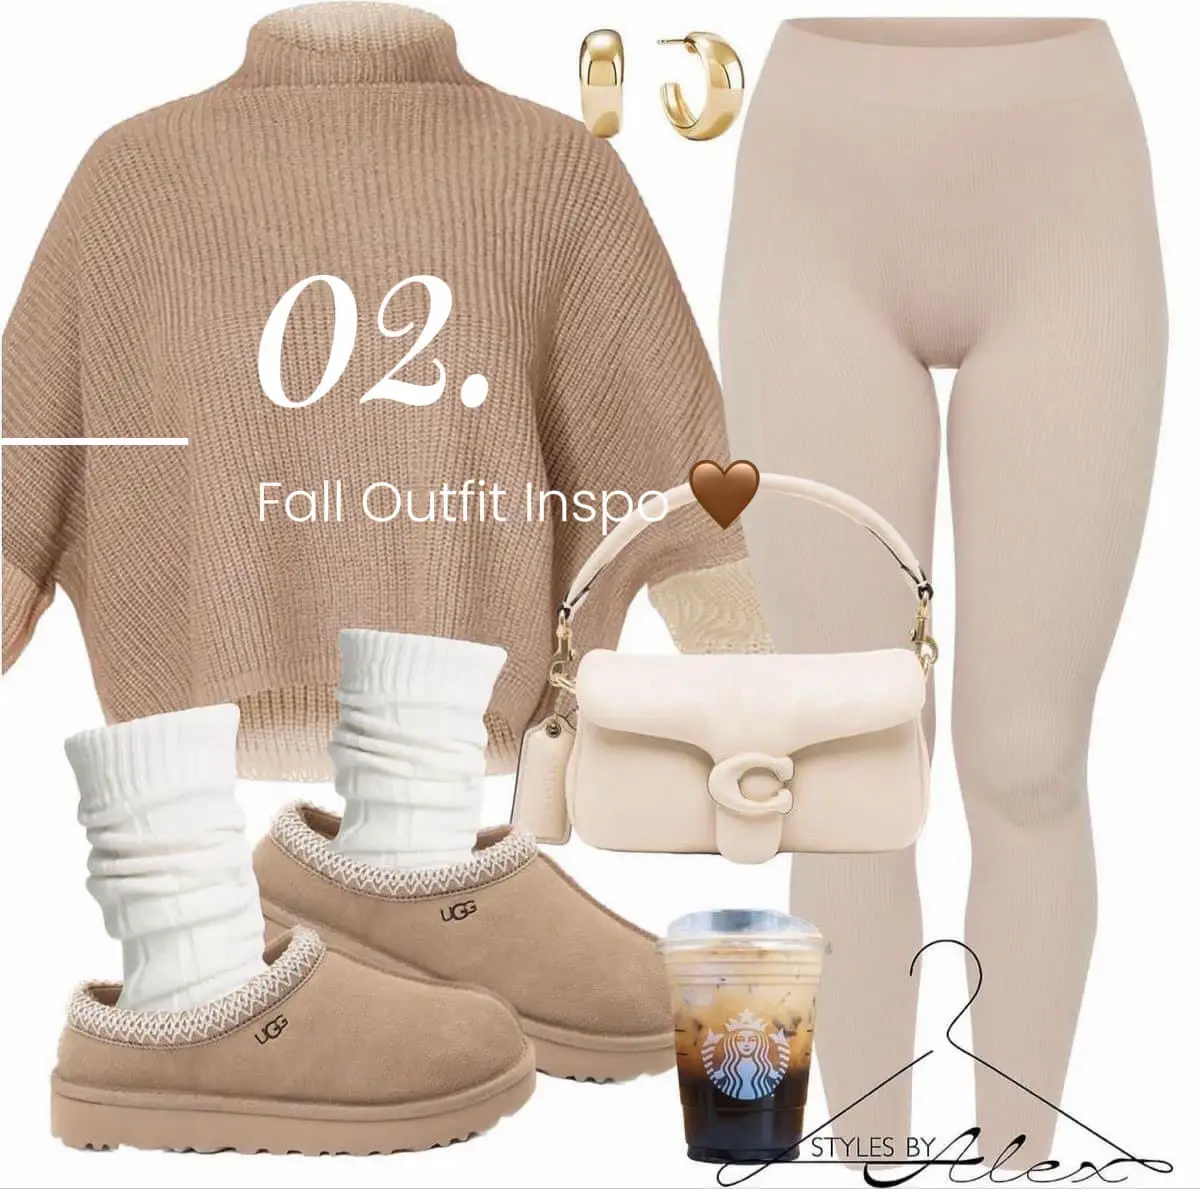 Autumn palette~night out outfits #outfitideas #inspo #fashion #luxury